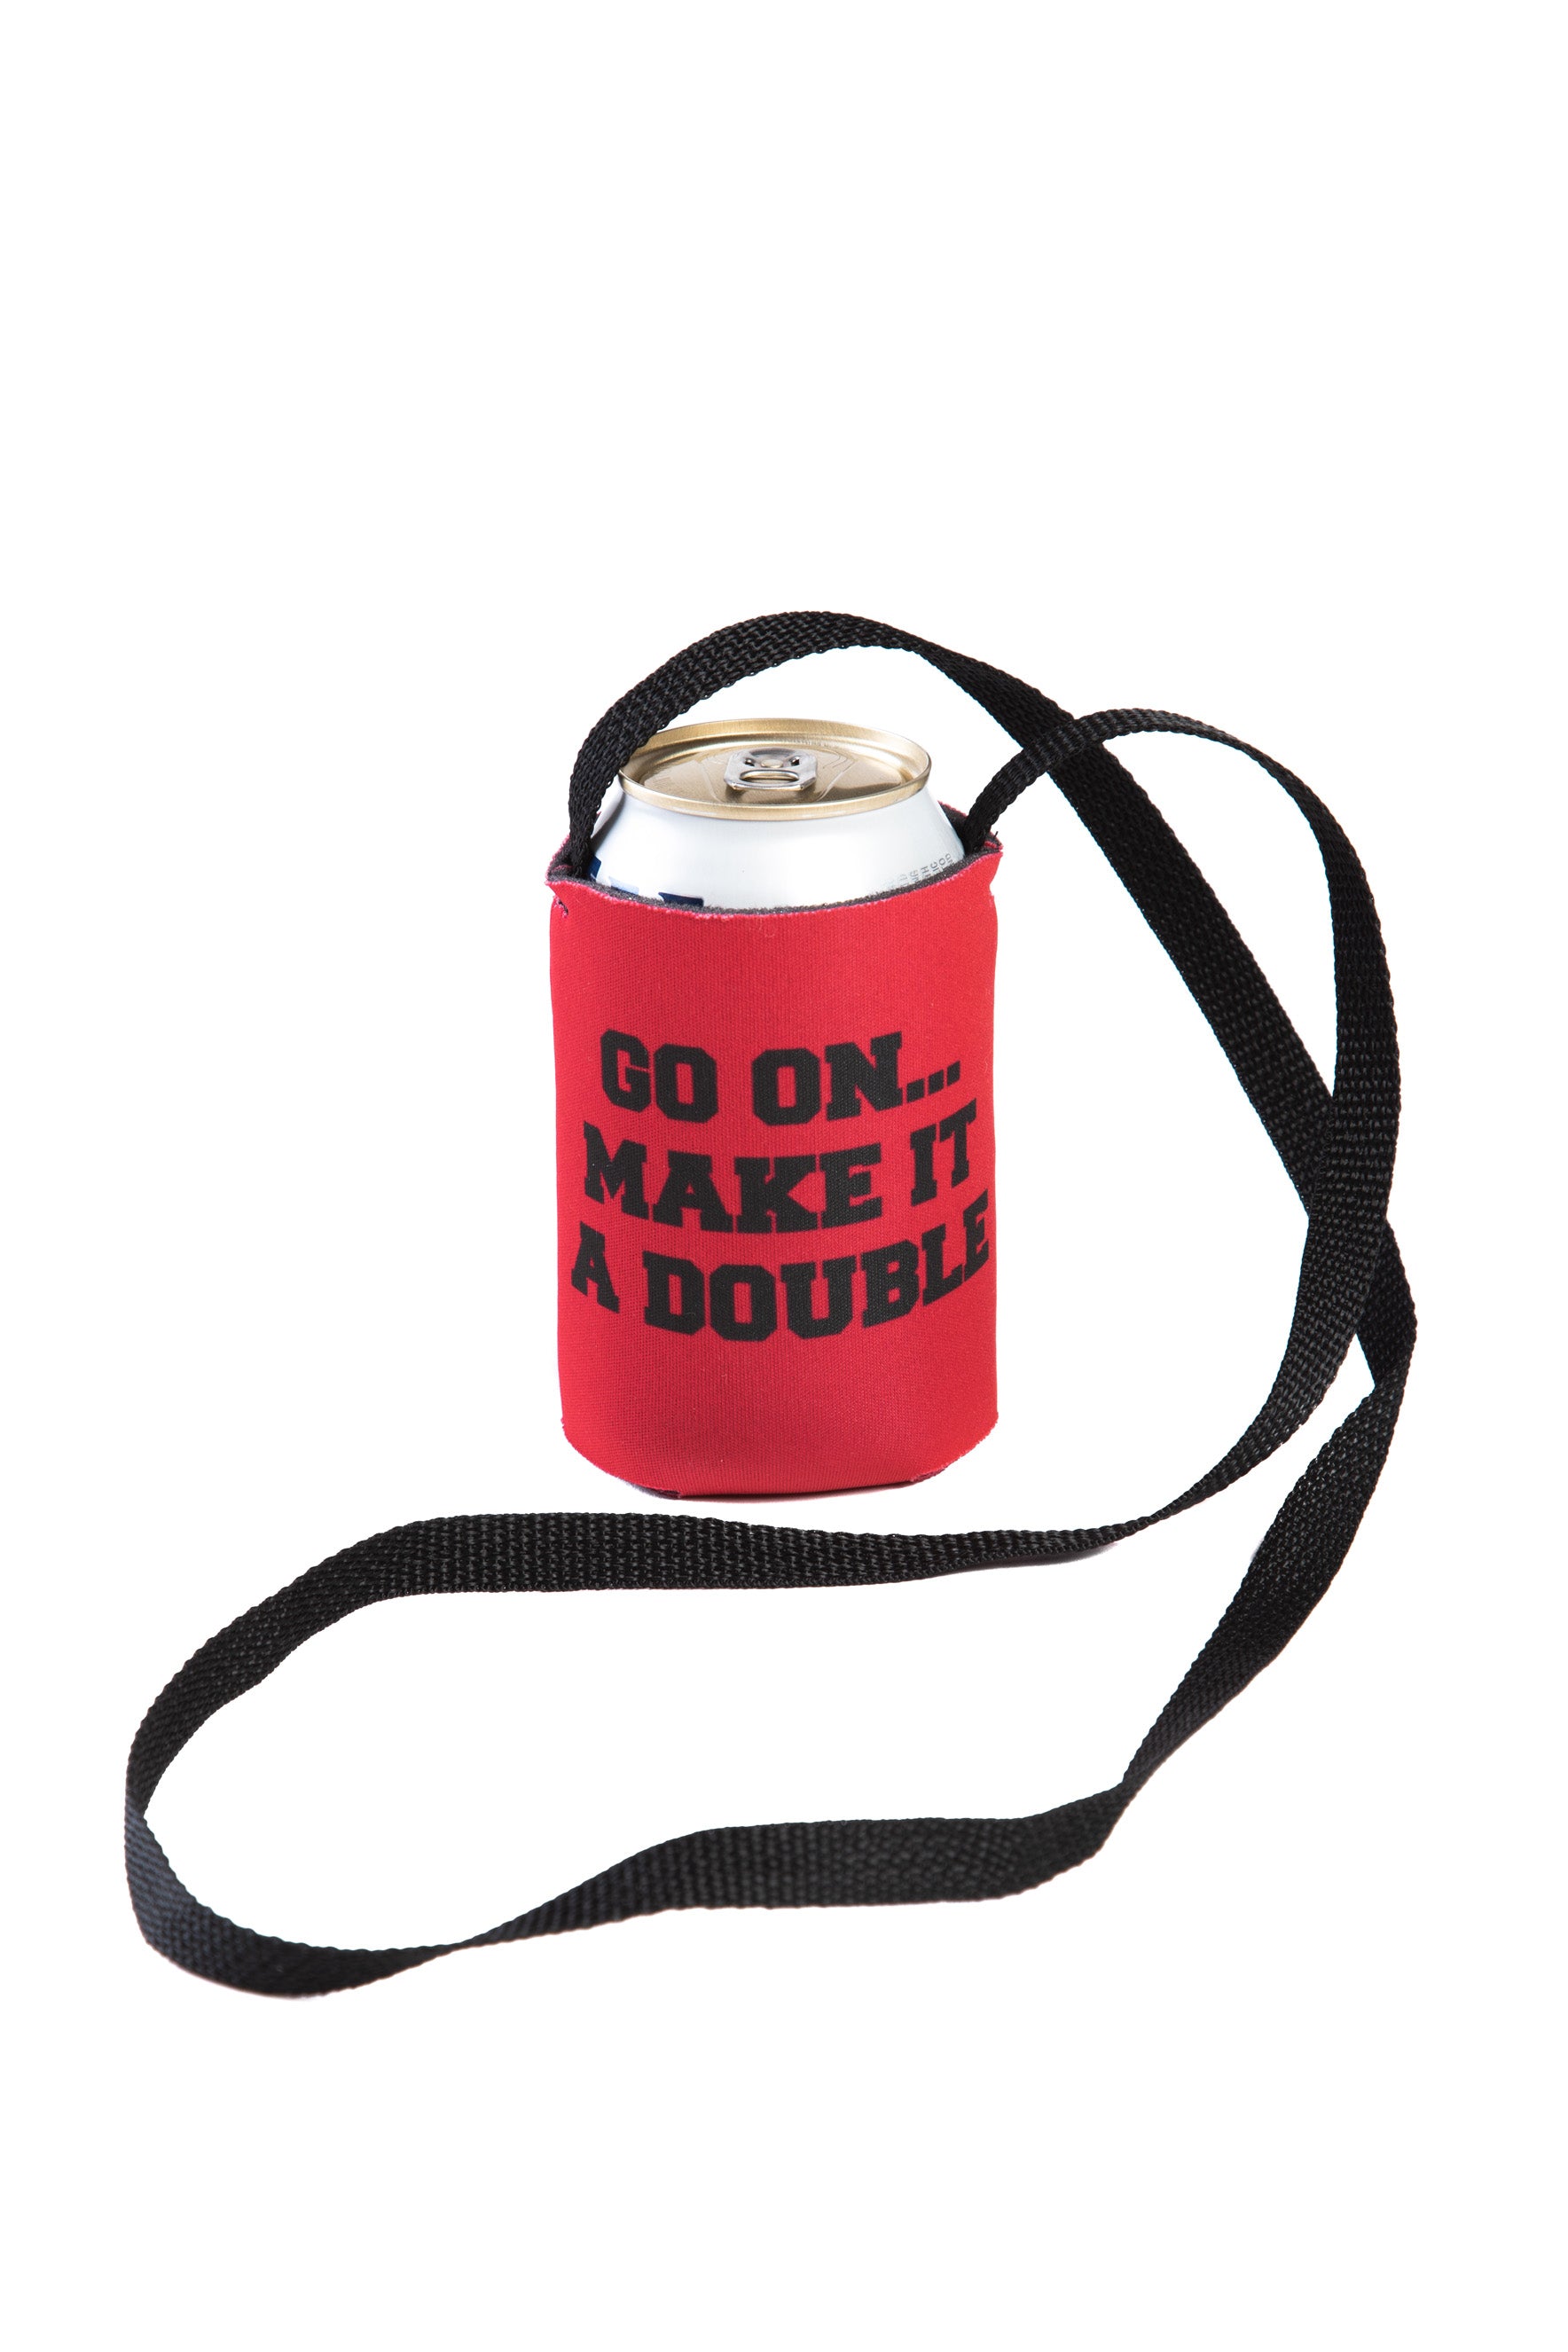 Ole Red Make It a Double Hands-Free Can Cooler